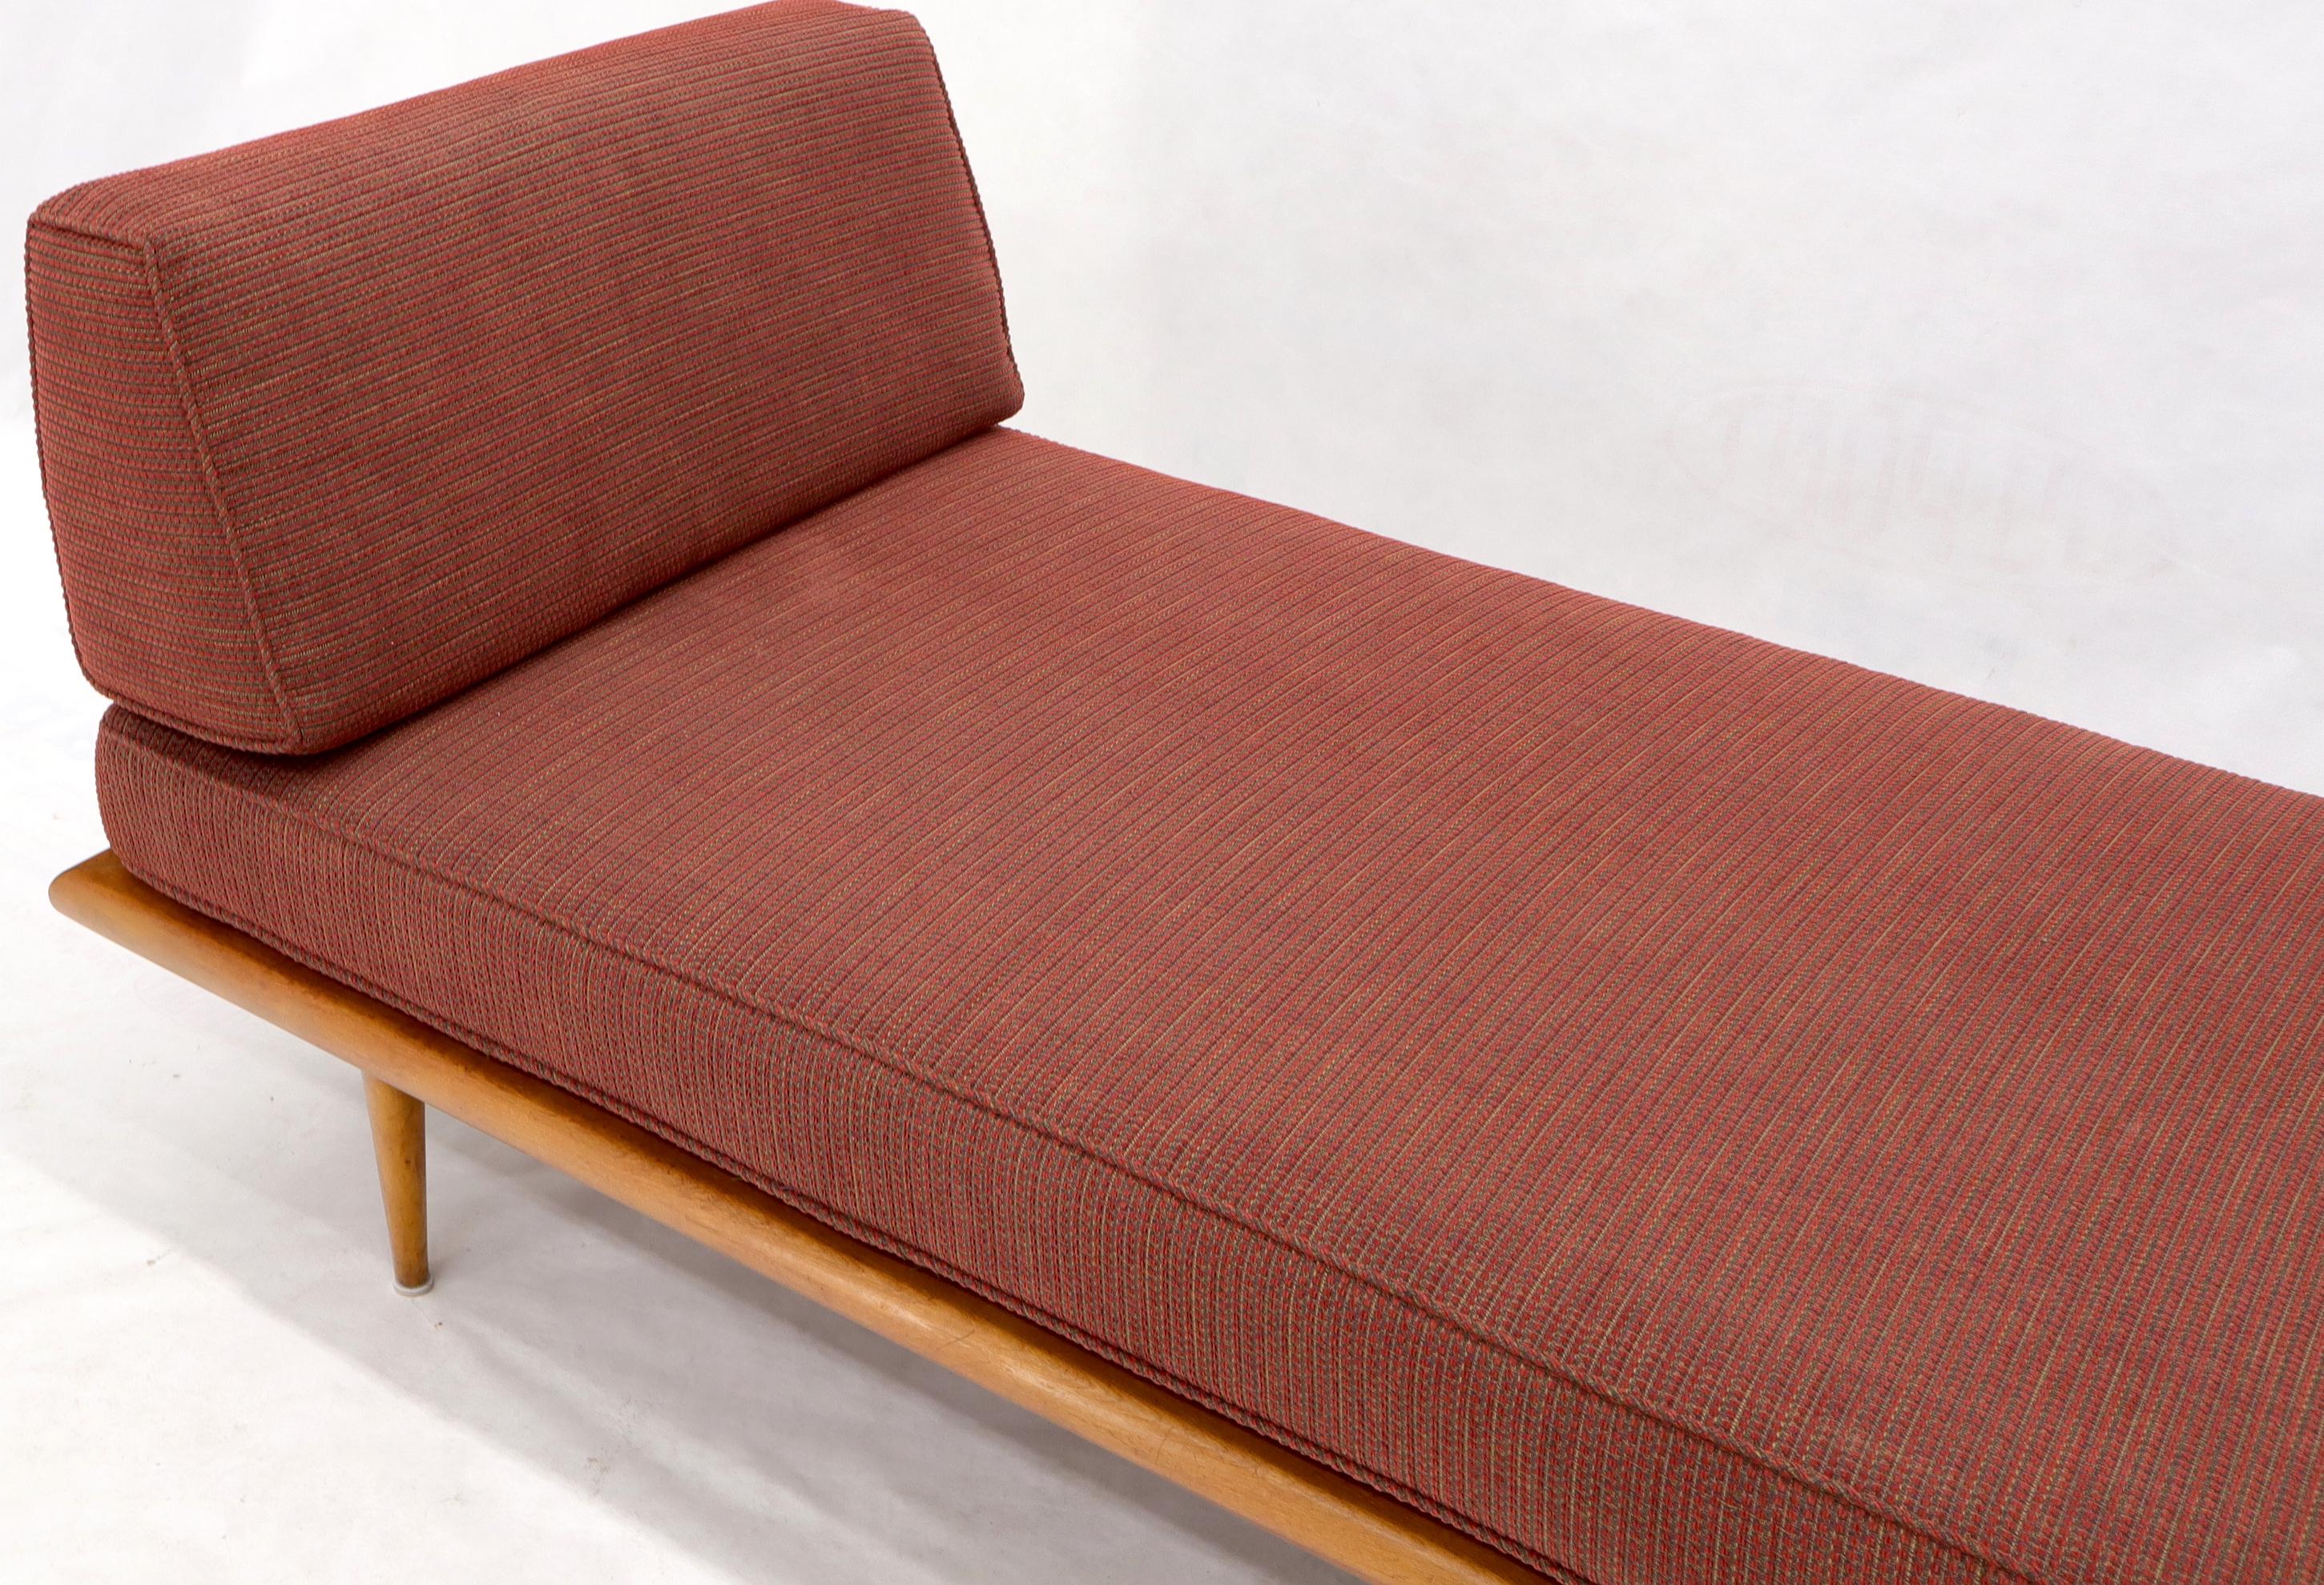 Mid-Century Modern Vintage George Nelson for Herman Miller Daybed Cot Sofa Chaise Lounge